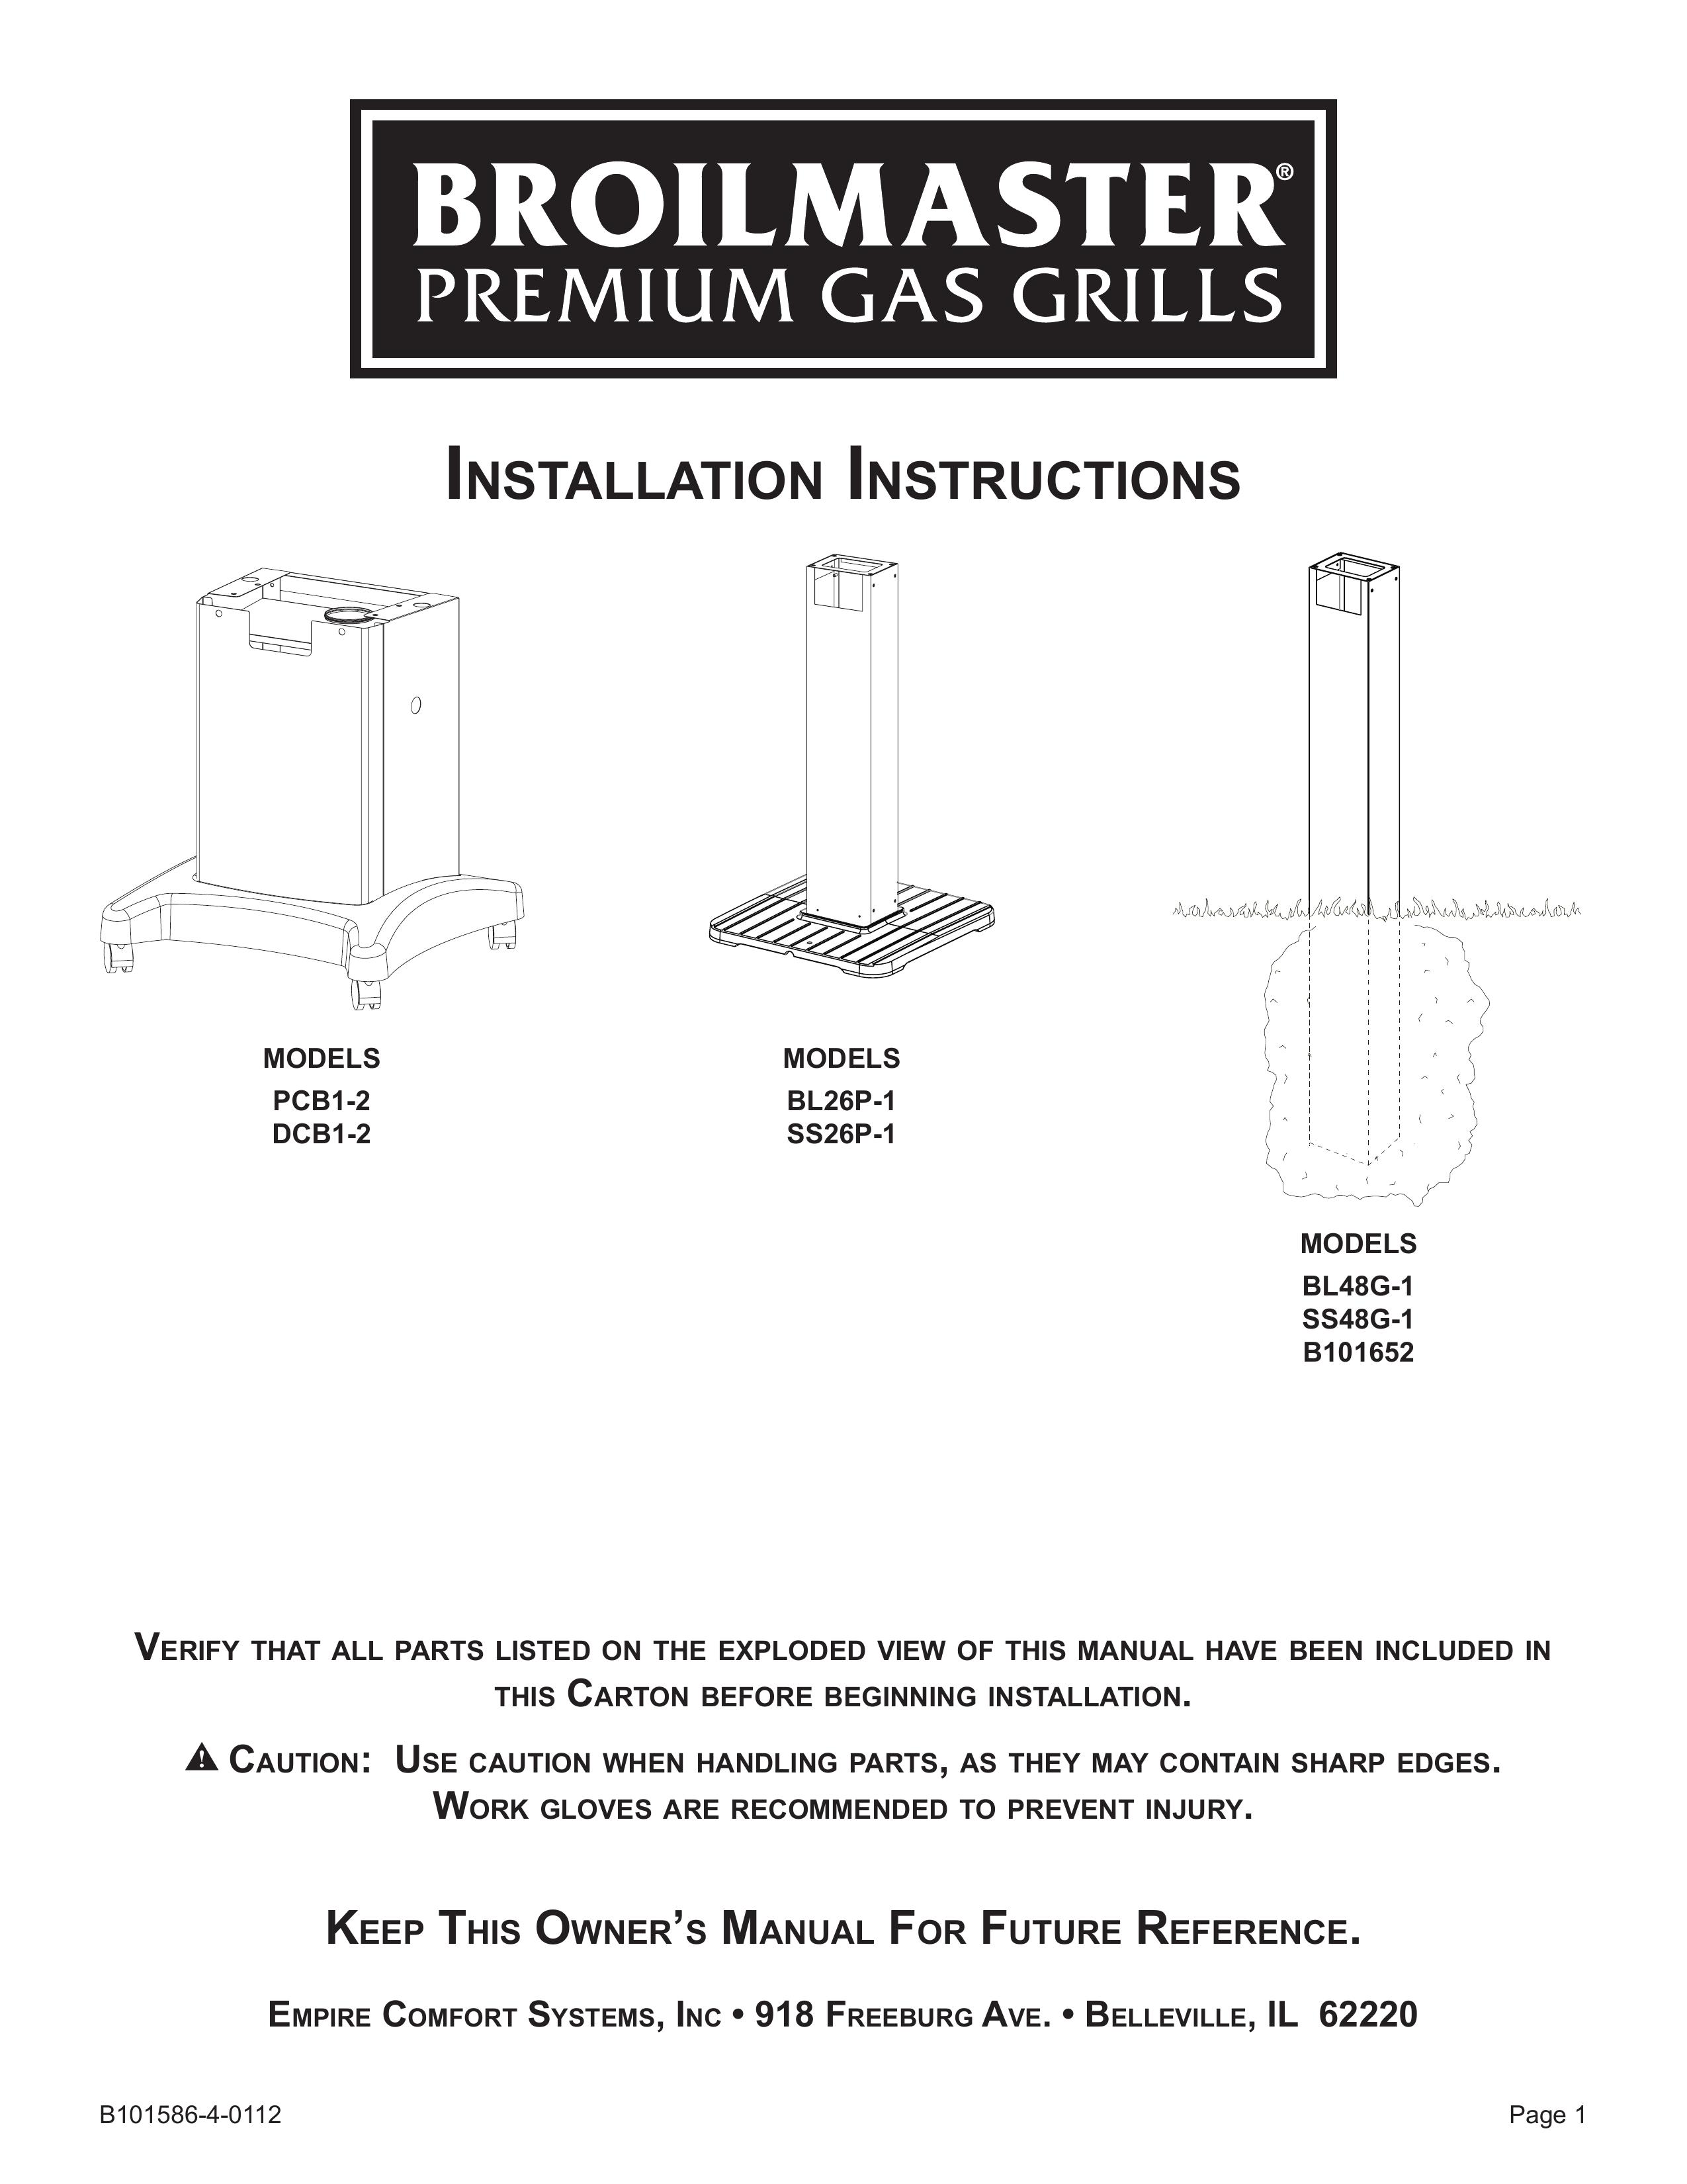 Broilmaster BL48G-1 Gas Grill User Manual